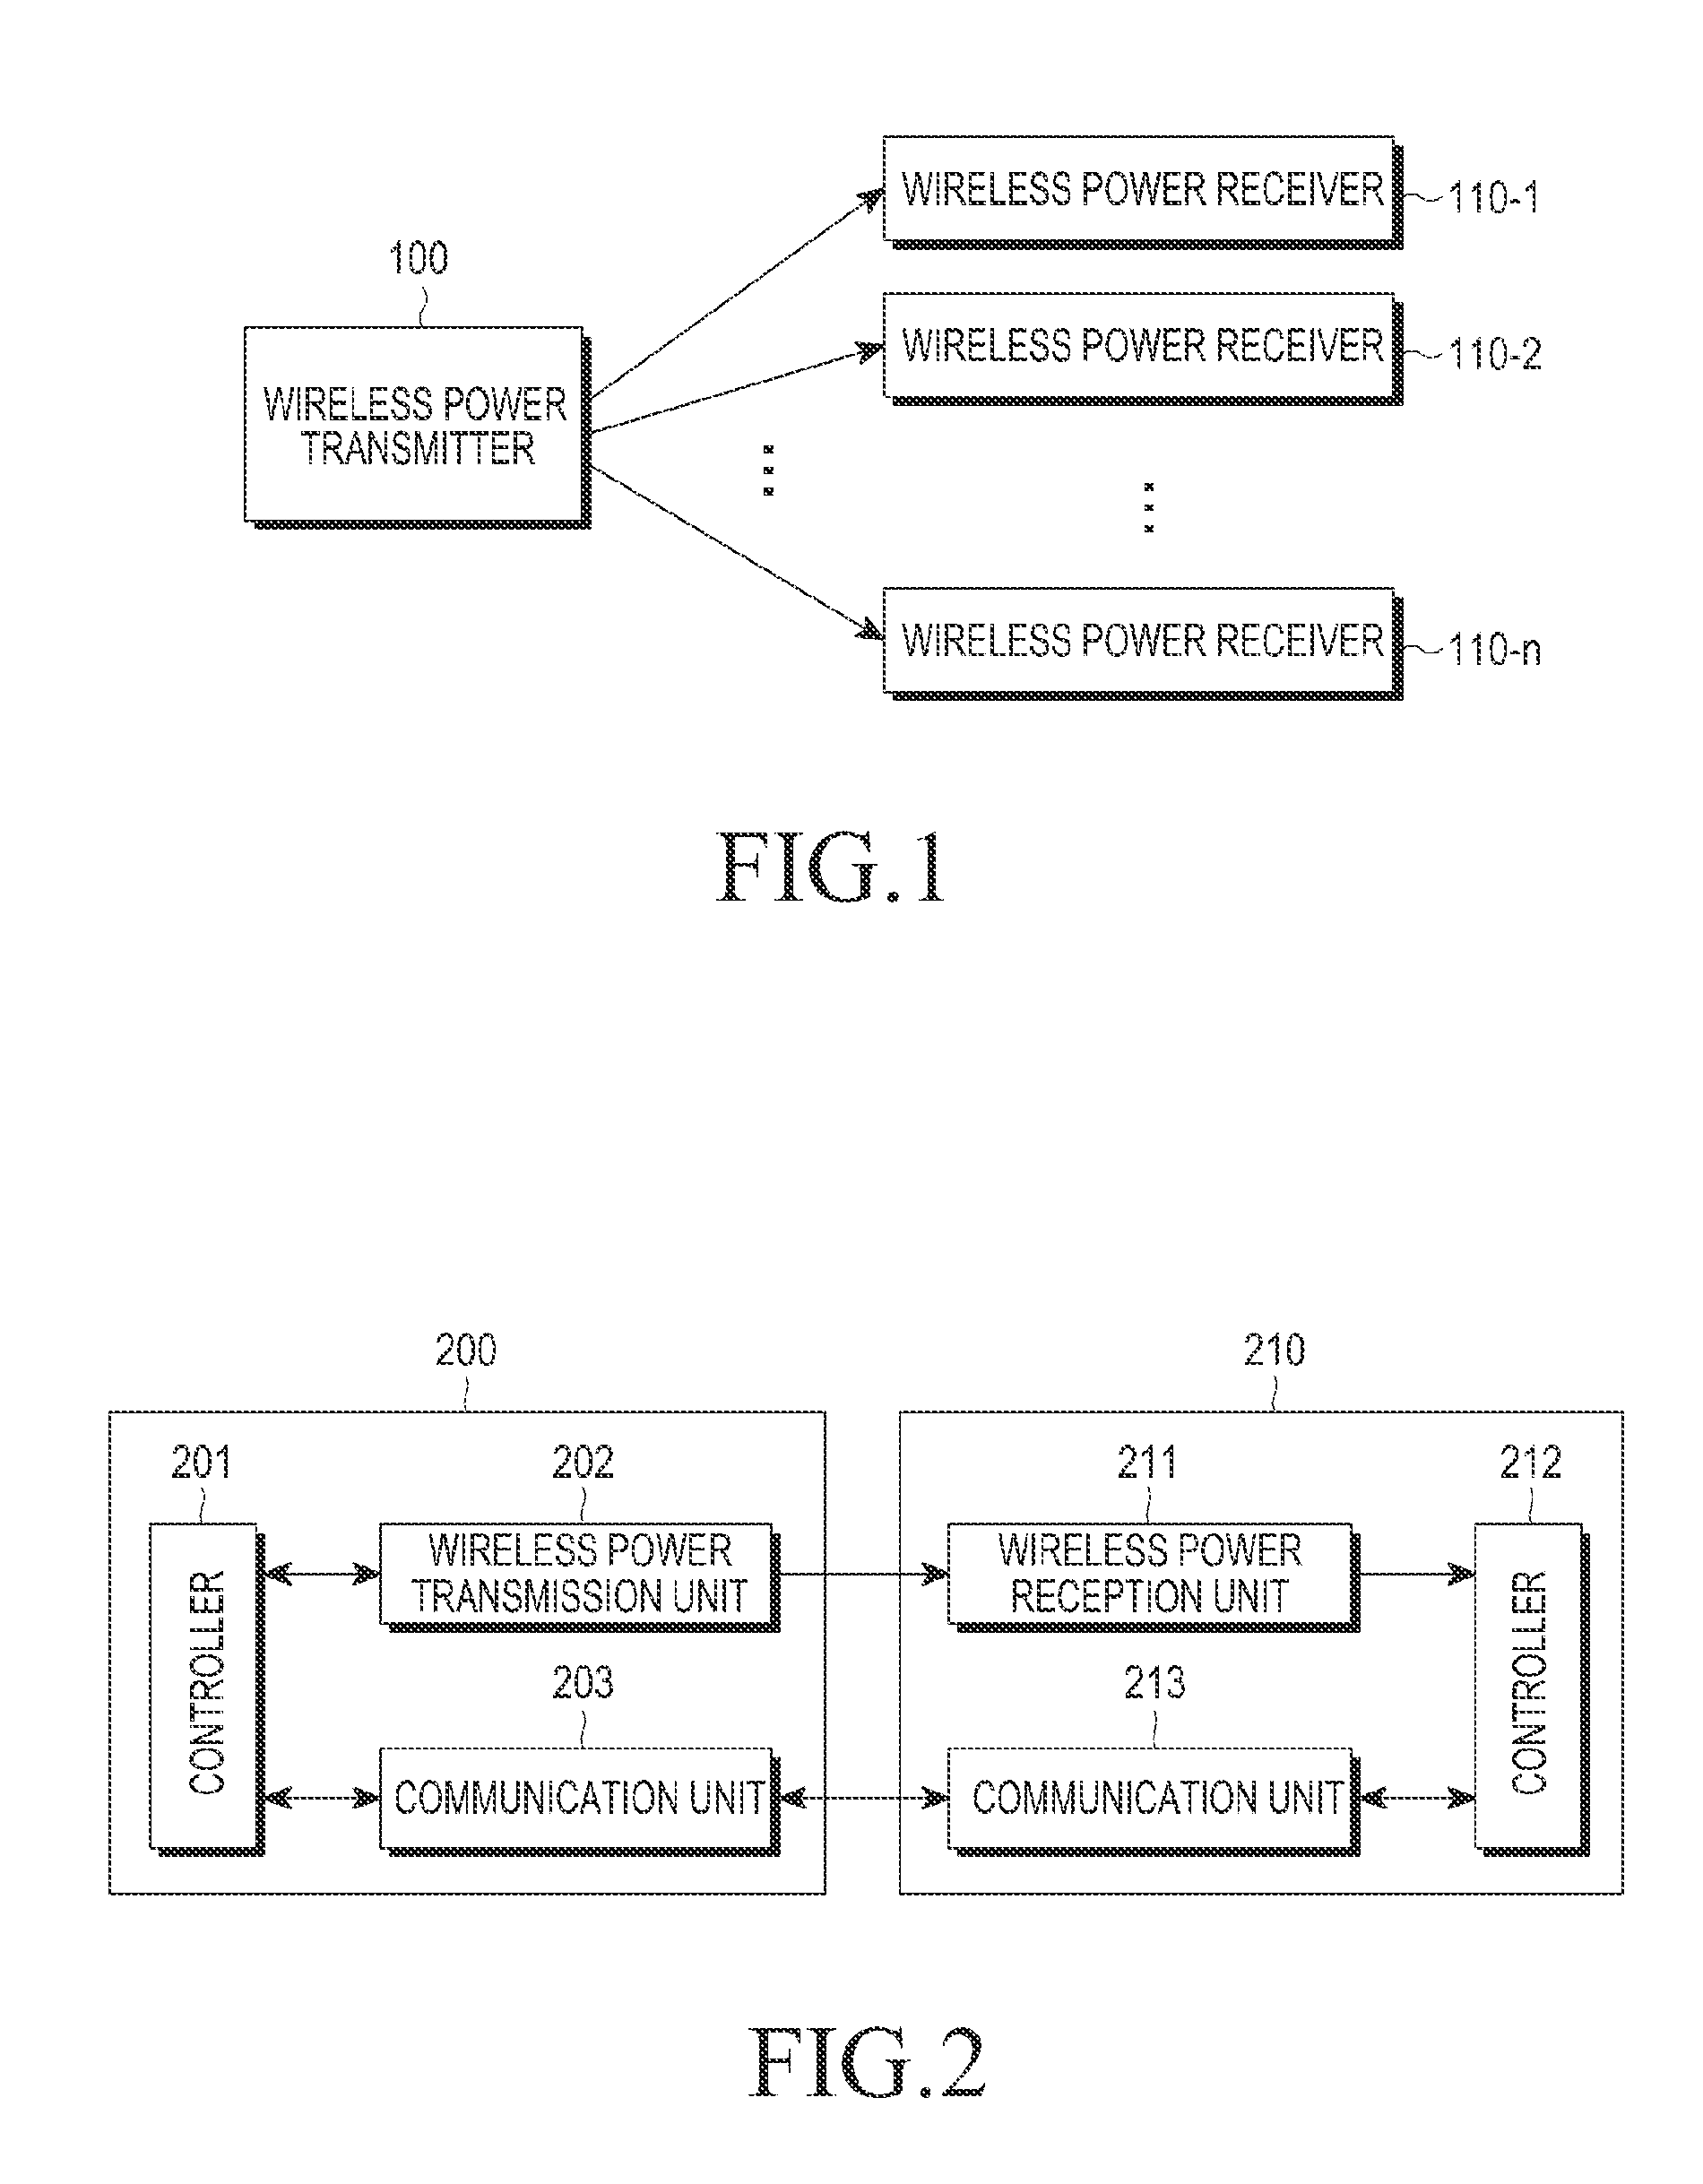 Method and apparatus for wirelessly charging multiple wireless power receivers